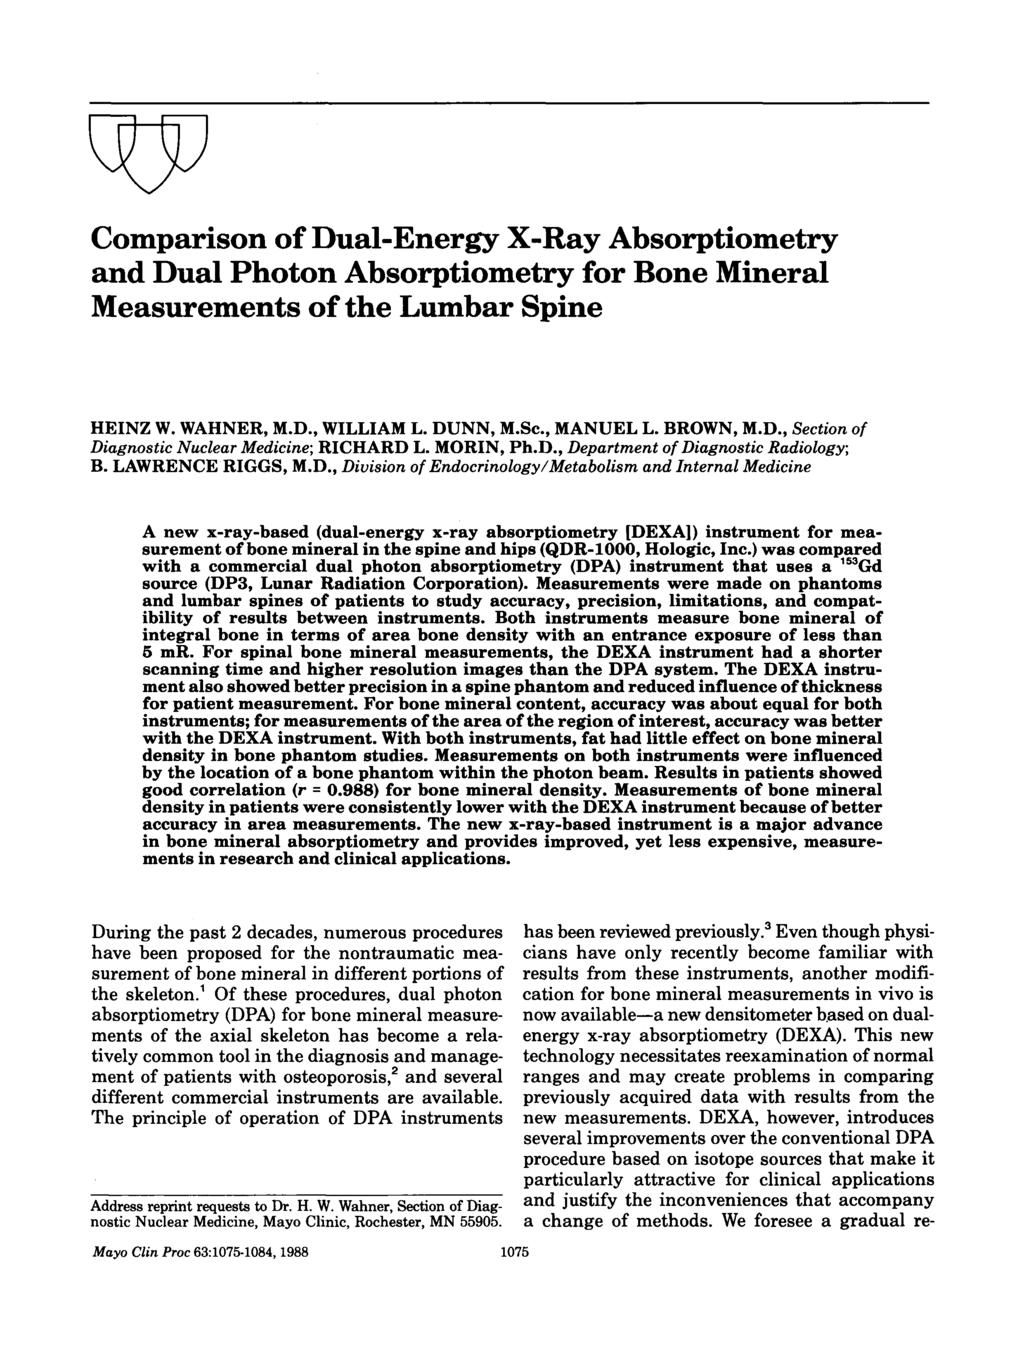 Comparison of Dual-Energy X-Ray Absorptiometry and Dual Photon Absorptiometry for Bone Mineral Measurements of the Lumbar Spine HENZ W. WAHNER, M.D., WLLAM L. DUNN, M.Sc, MANUEL L. BROWN, M.D., Section of Diagnostic Nuclear Medicine; RCHARD L.